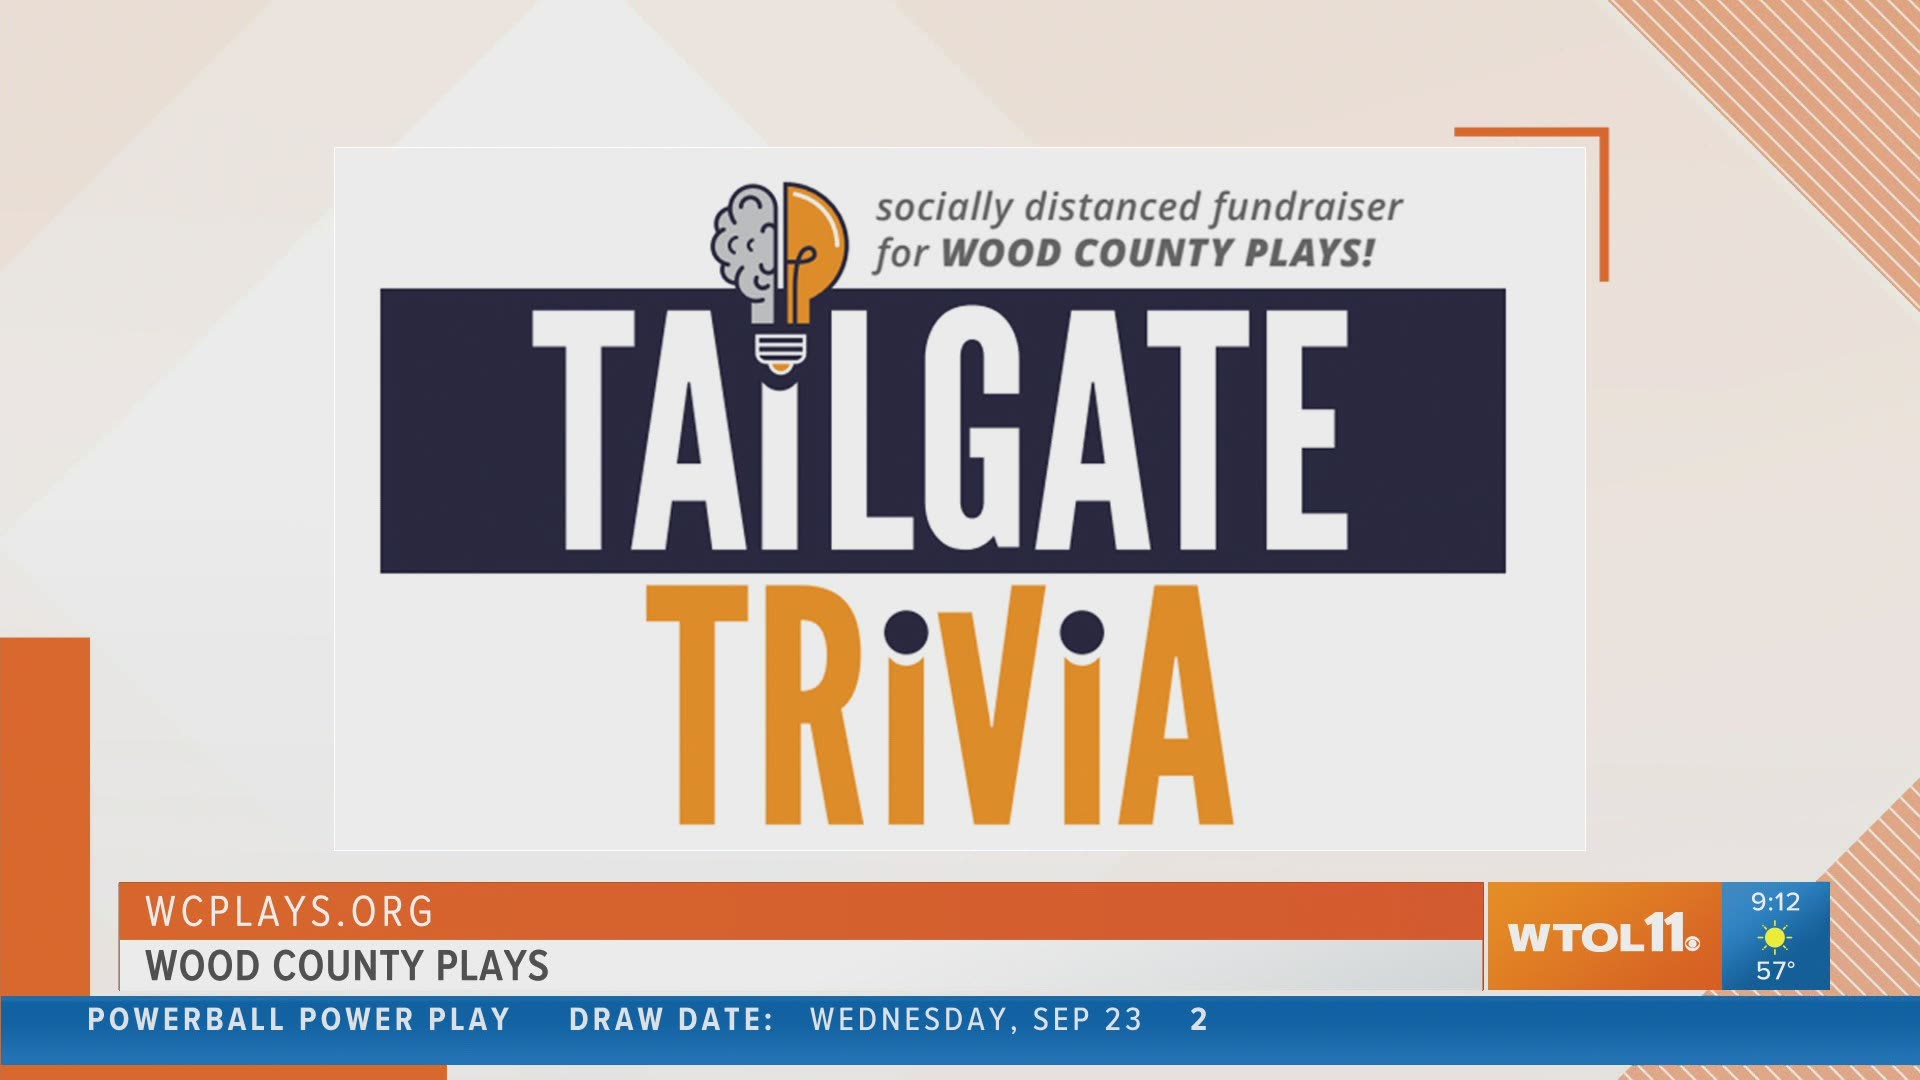 Wood County Plays invites you to Tailgate Trivia! Have fun and help raise money for an inclusive playground that all kids can enjoy!